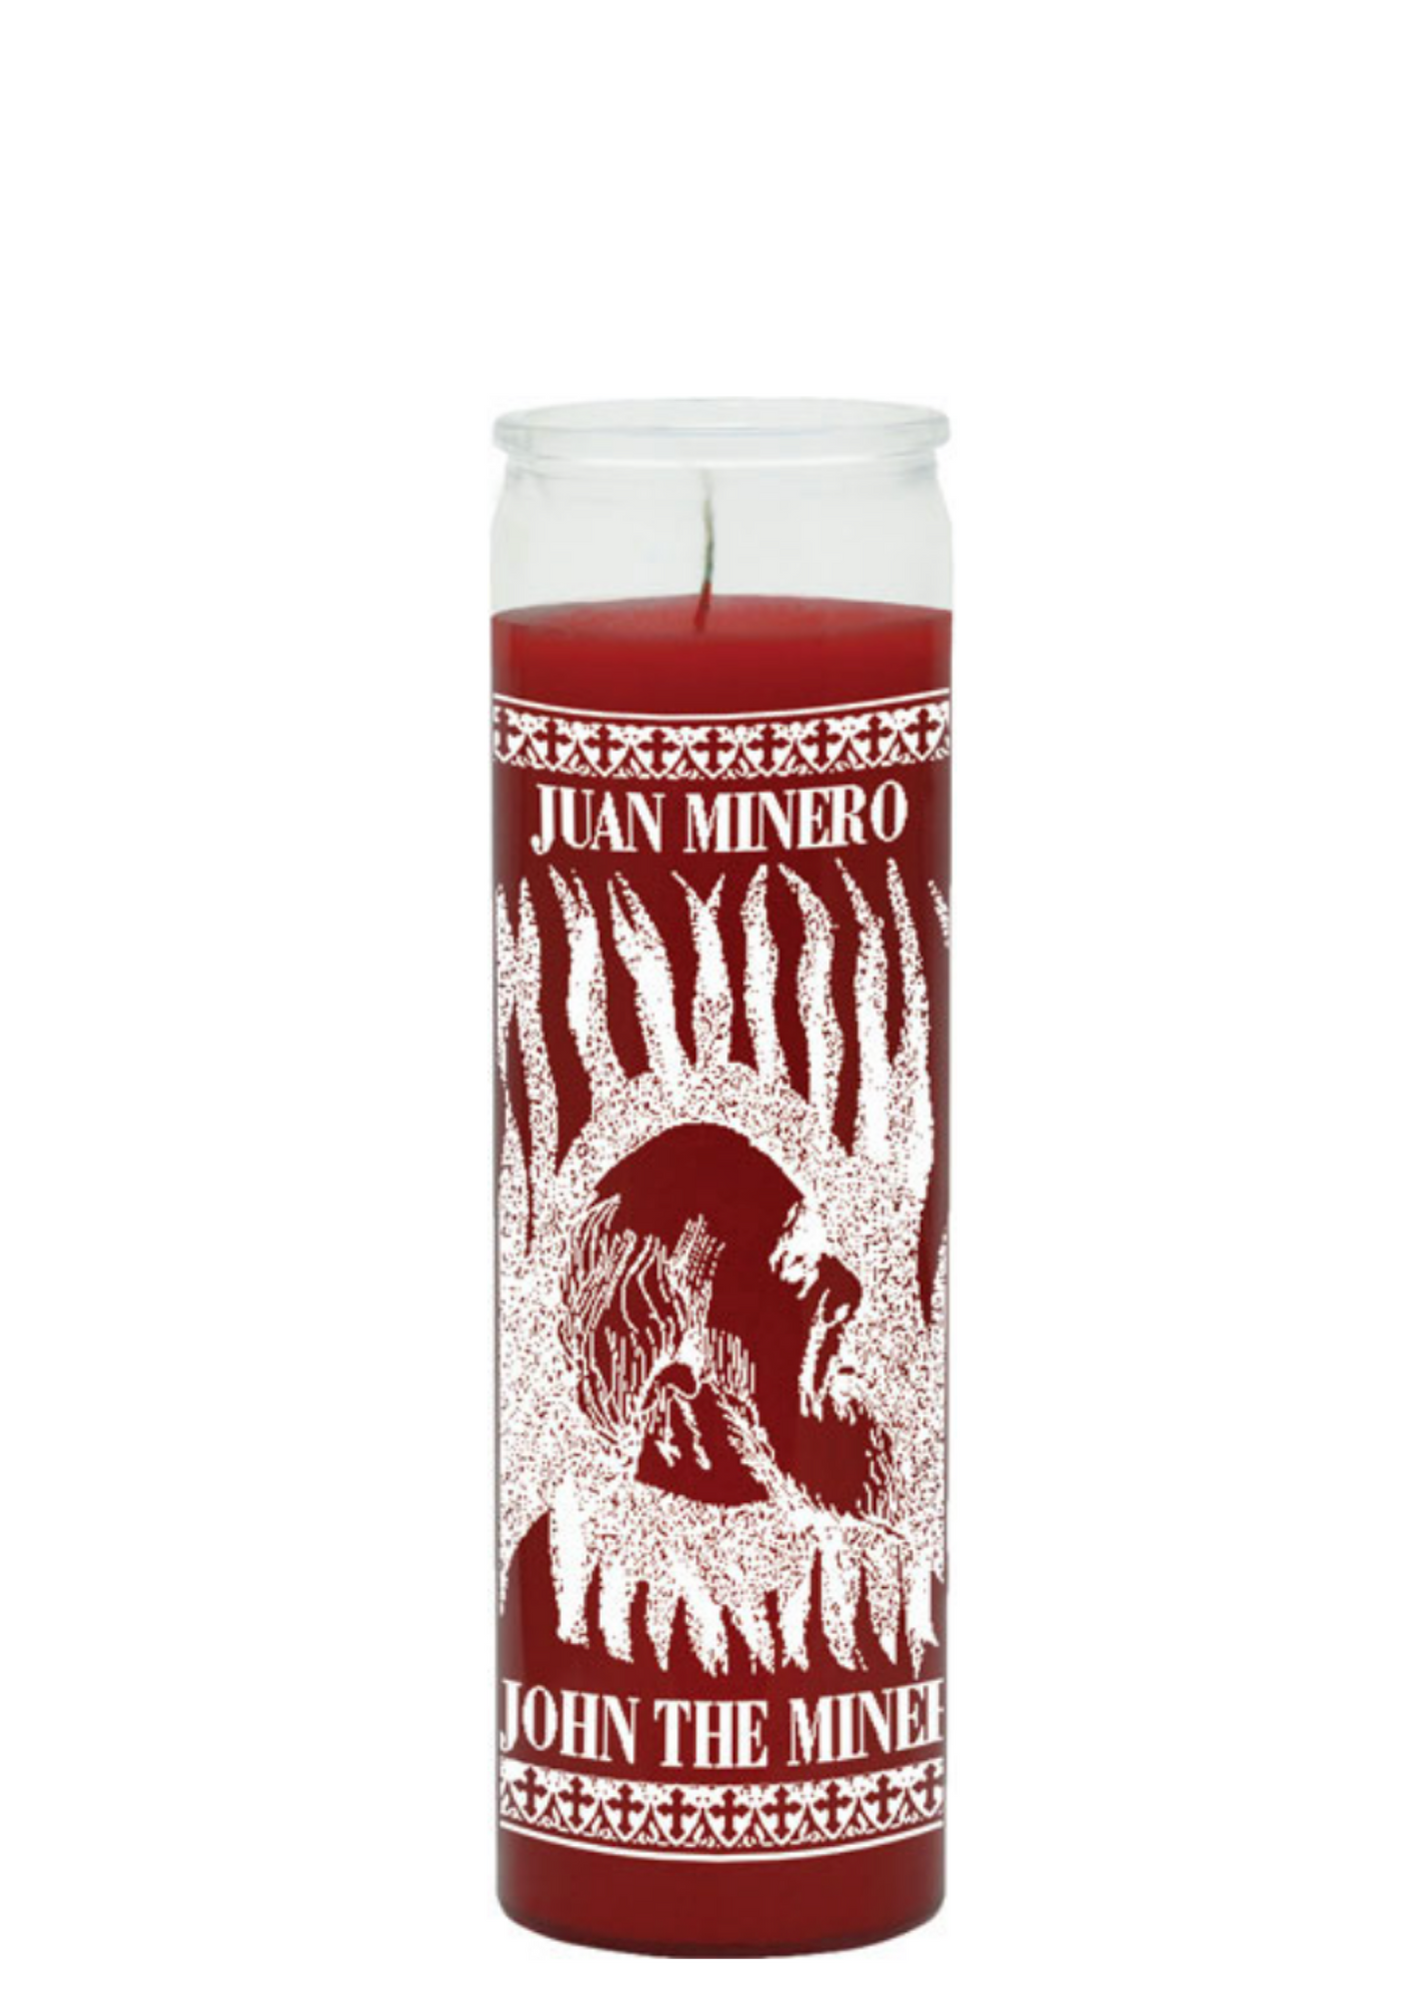 John the miner (red) 1 color 7 day candle